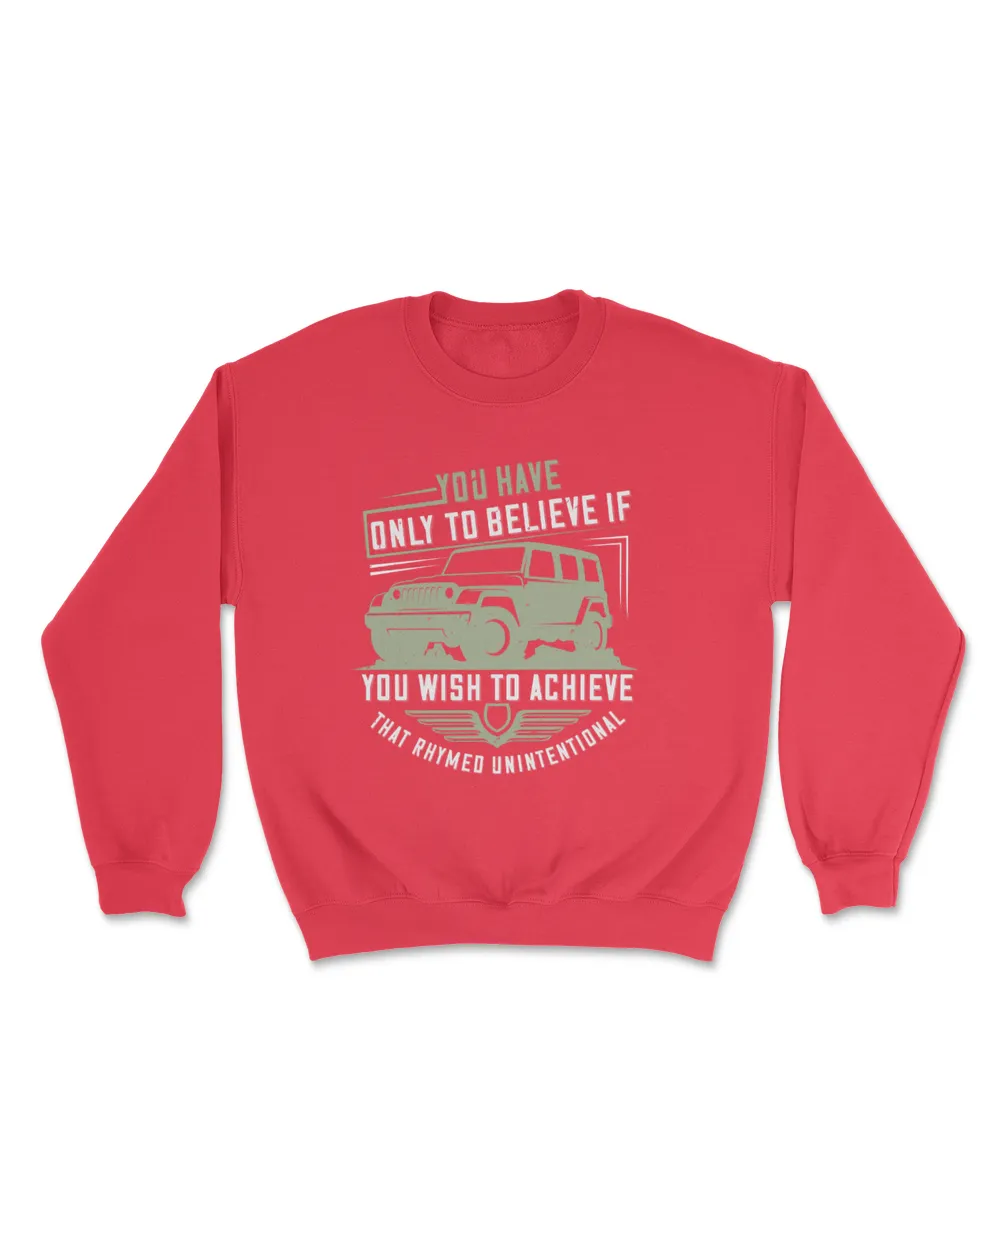 You Have Only To Believe If You Wish To Achieve Hot Rod T-Shirt